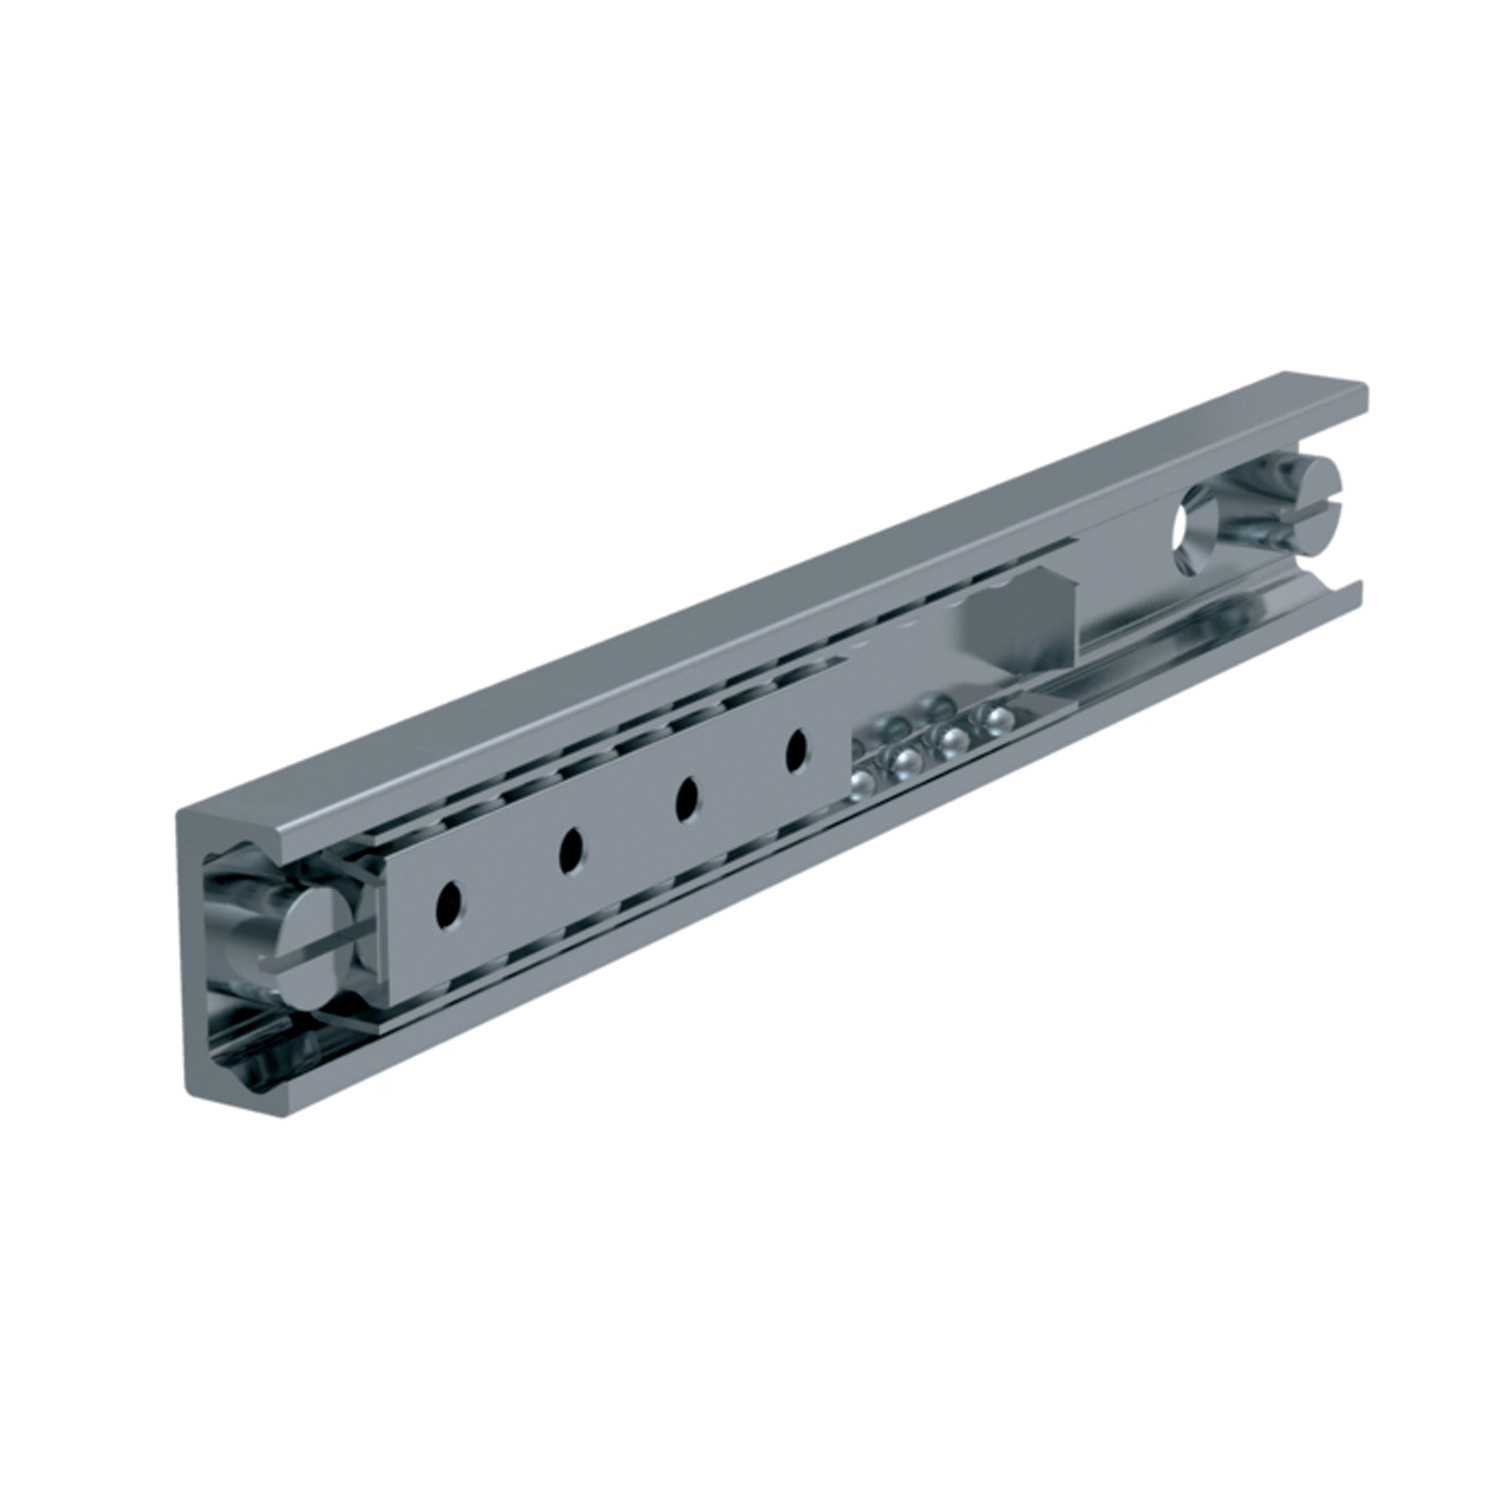 High Load Rails For heavier duty shorter stroke applications (lengths up to 2 metres) - affordable heavy duty rail with high strength and rigidity.